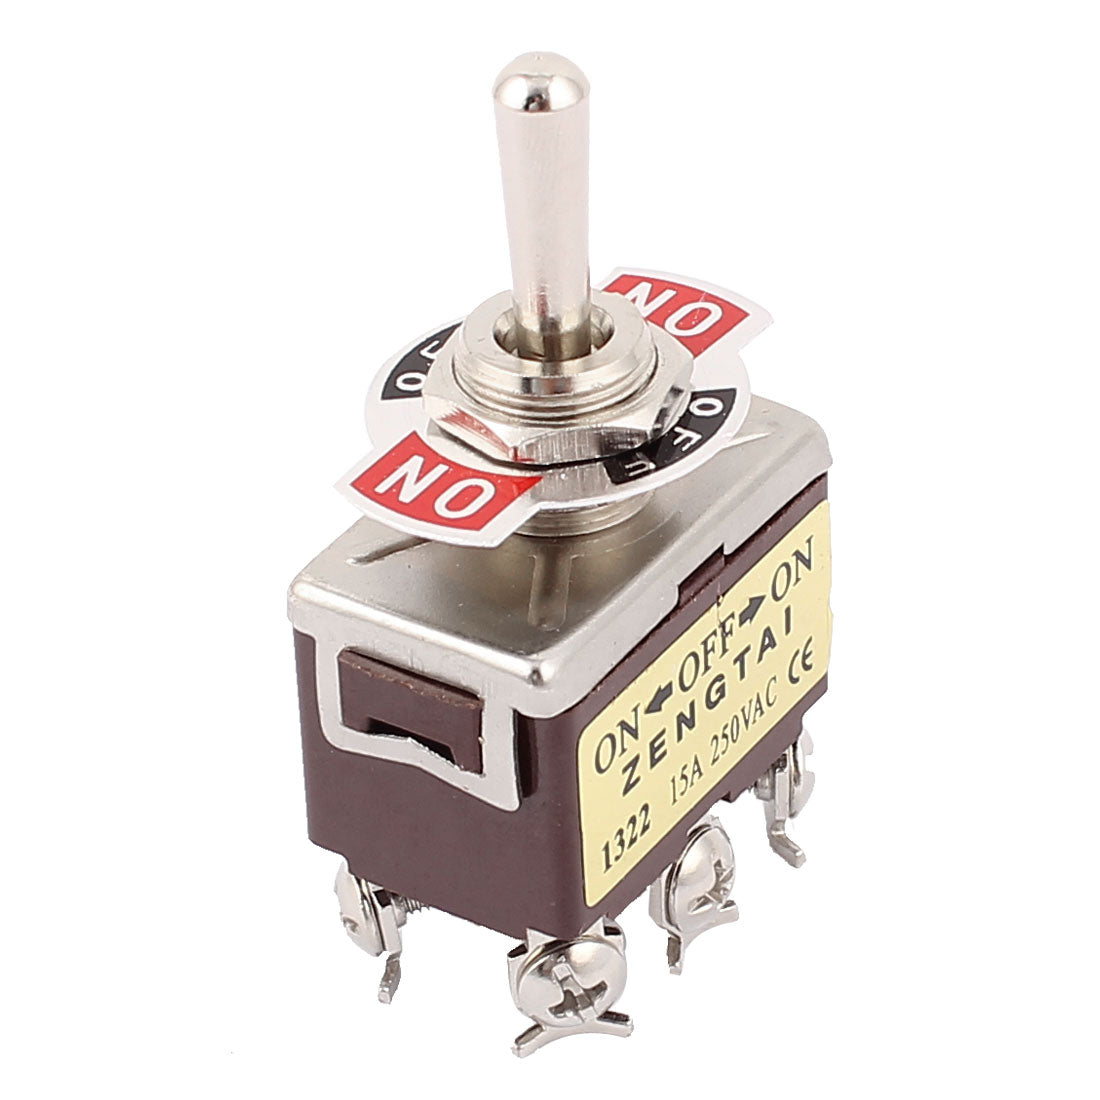 uxcell Uxcell AC 250V/15A 6 Screw Terminals ON/OFF/ON Latching 3 Position DPDT Toggle Switch